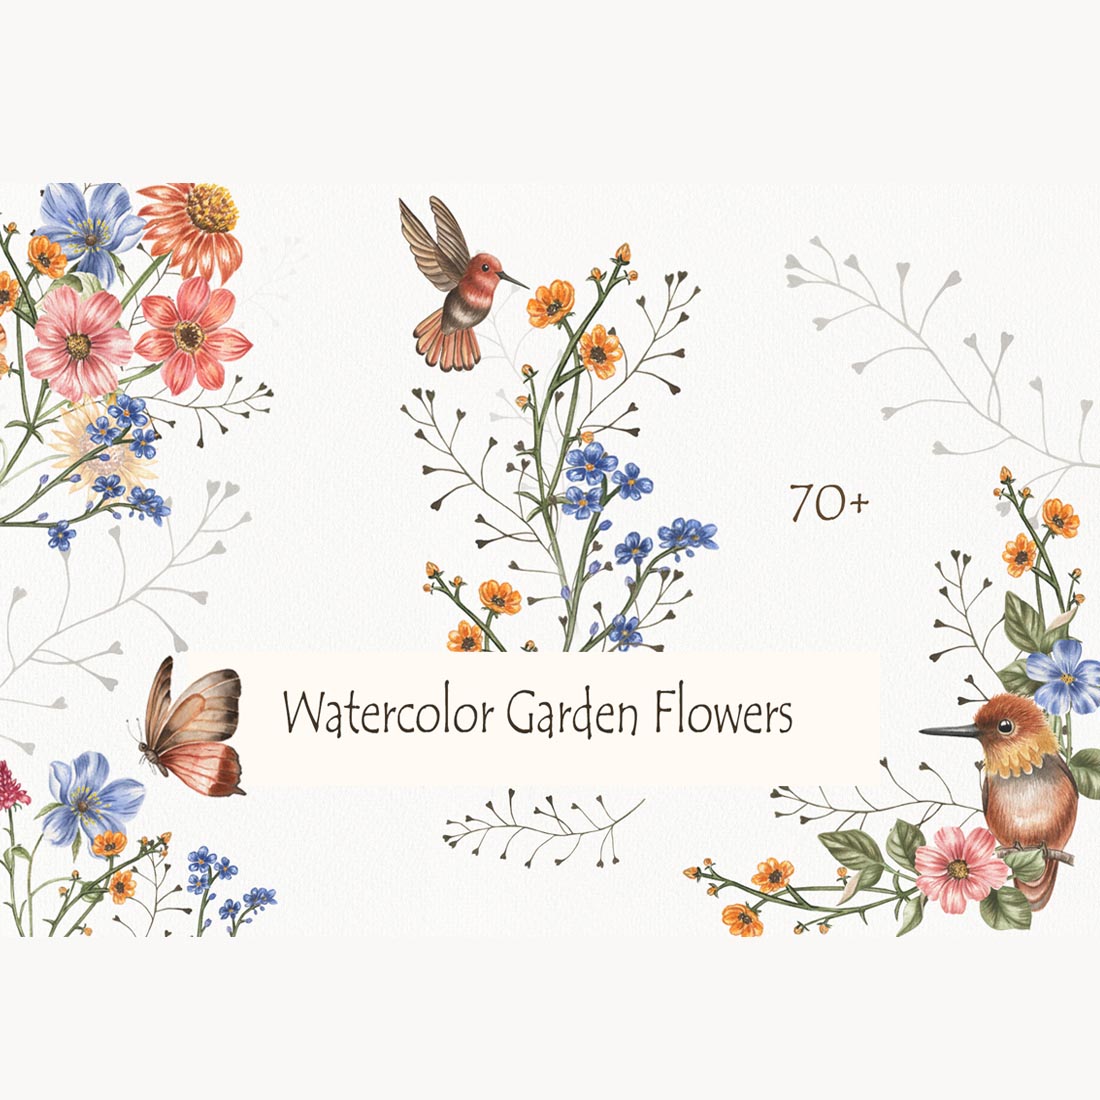 Watercolor Garden Flowers cover image.